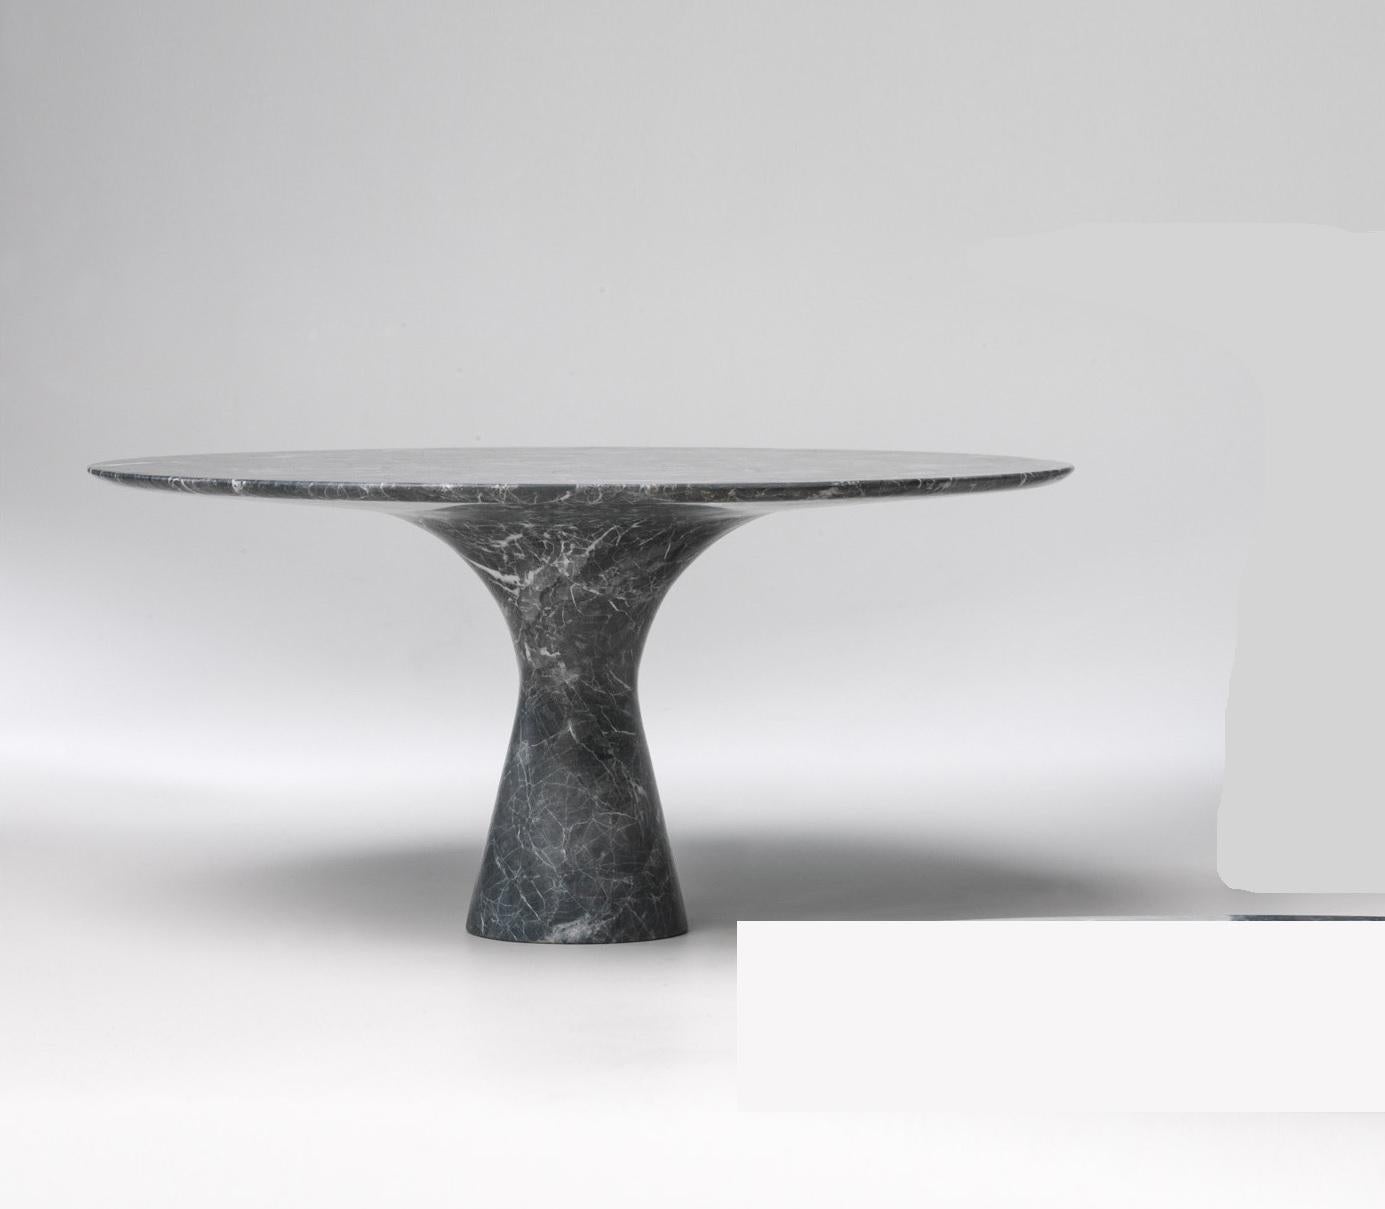 Refined Contemporary Marble 02 Grey Saint Laurent Marble Cake Stand
Signed by Leo Aerts.
Dimensions: Diameter 32 x H 15 cm 
Material: Grafite Marble
Technique: Polished, Carved. 
Available in Marble: Kyknos, Bianco Statuarietto, Grey Saint Laurent,